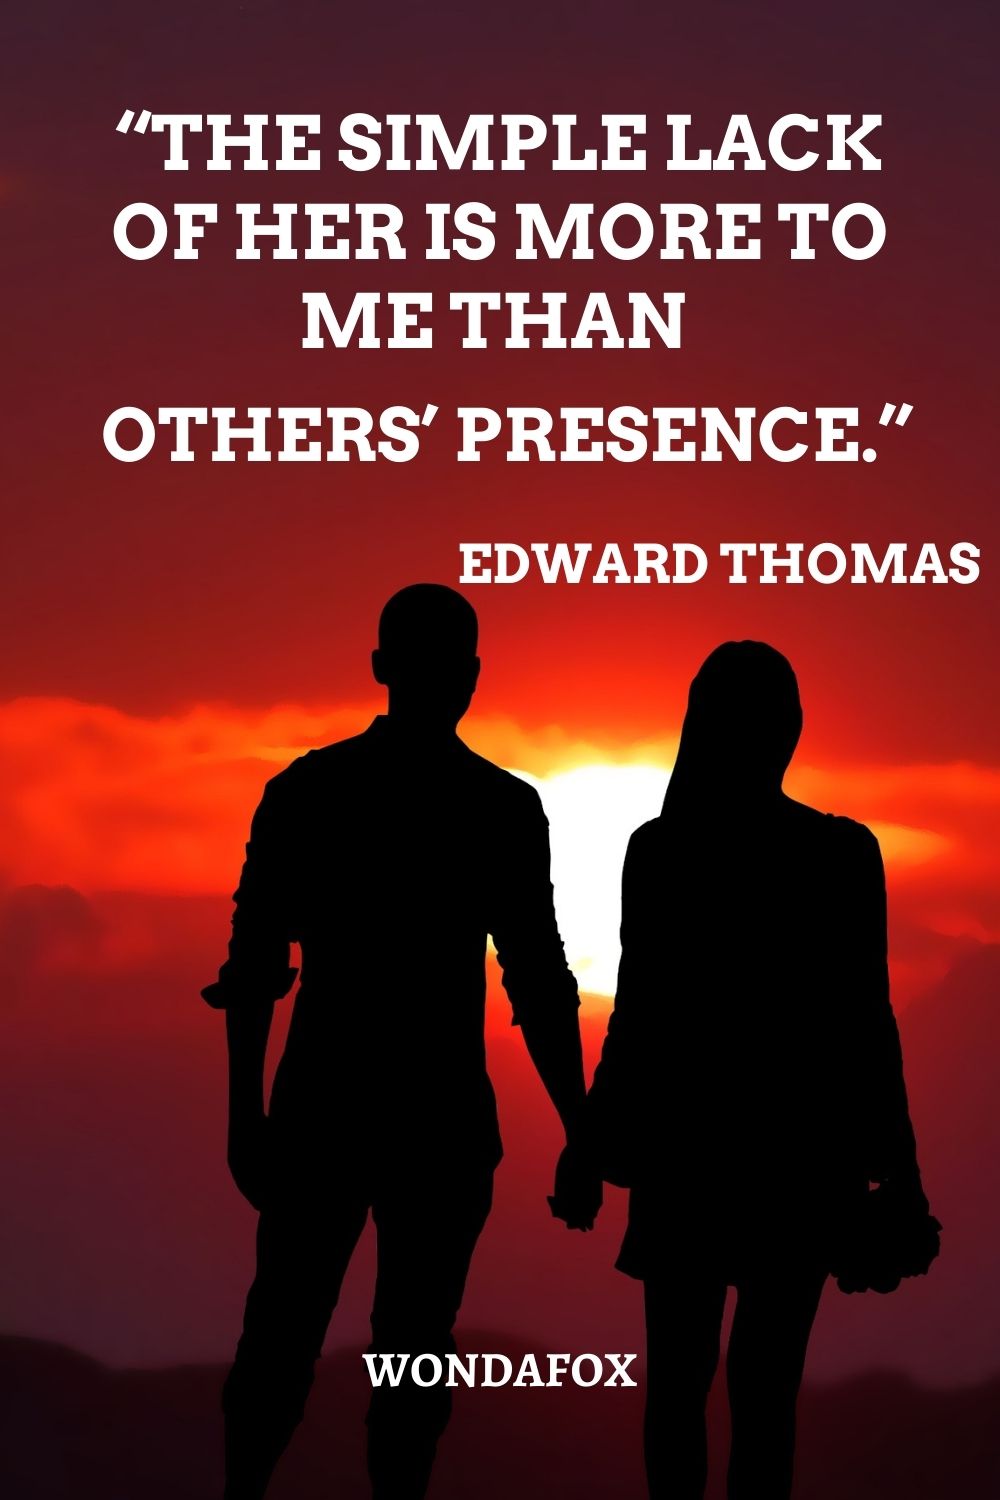 “The simple lack of her is more to me than others’ presence.”
Edward Thomas